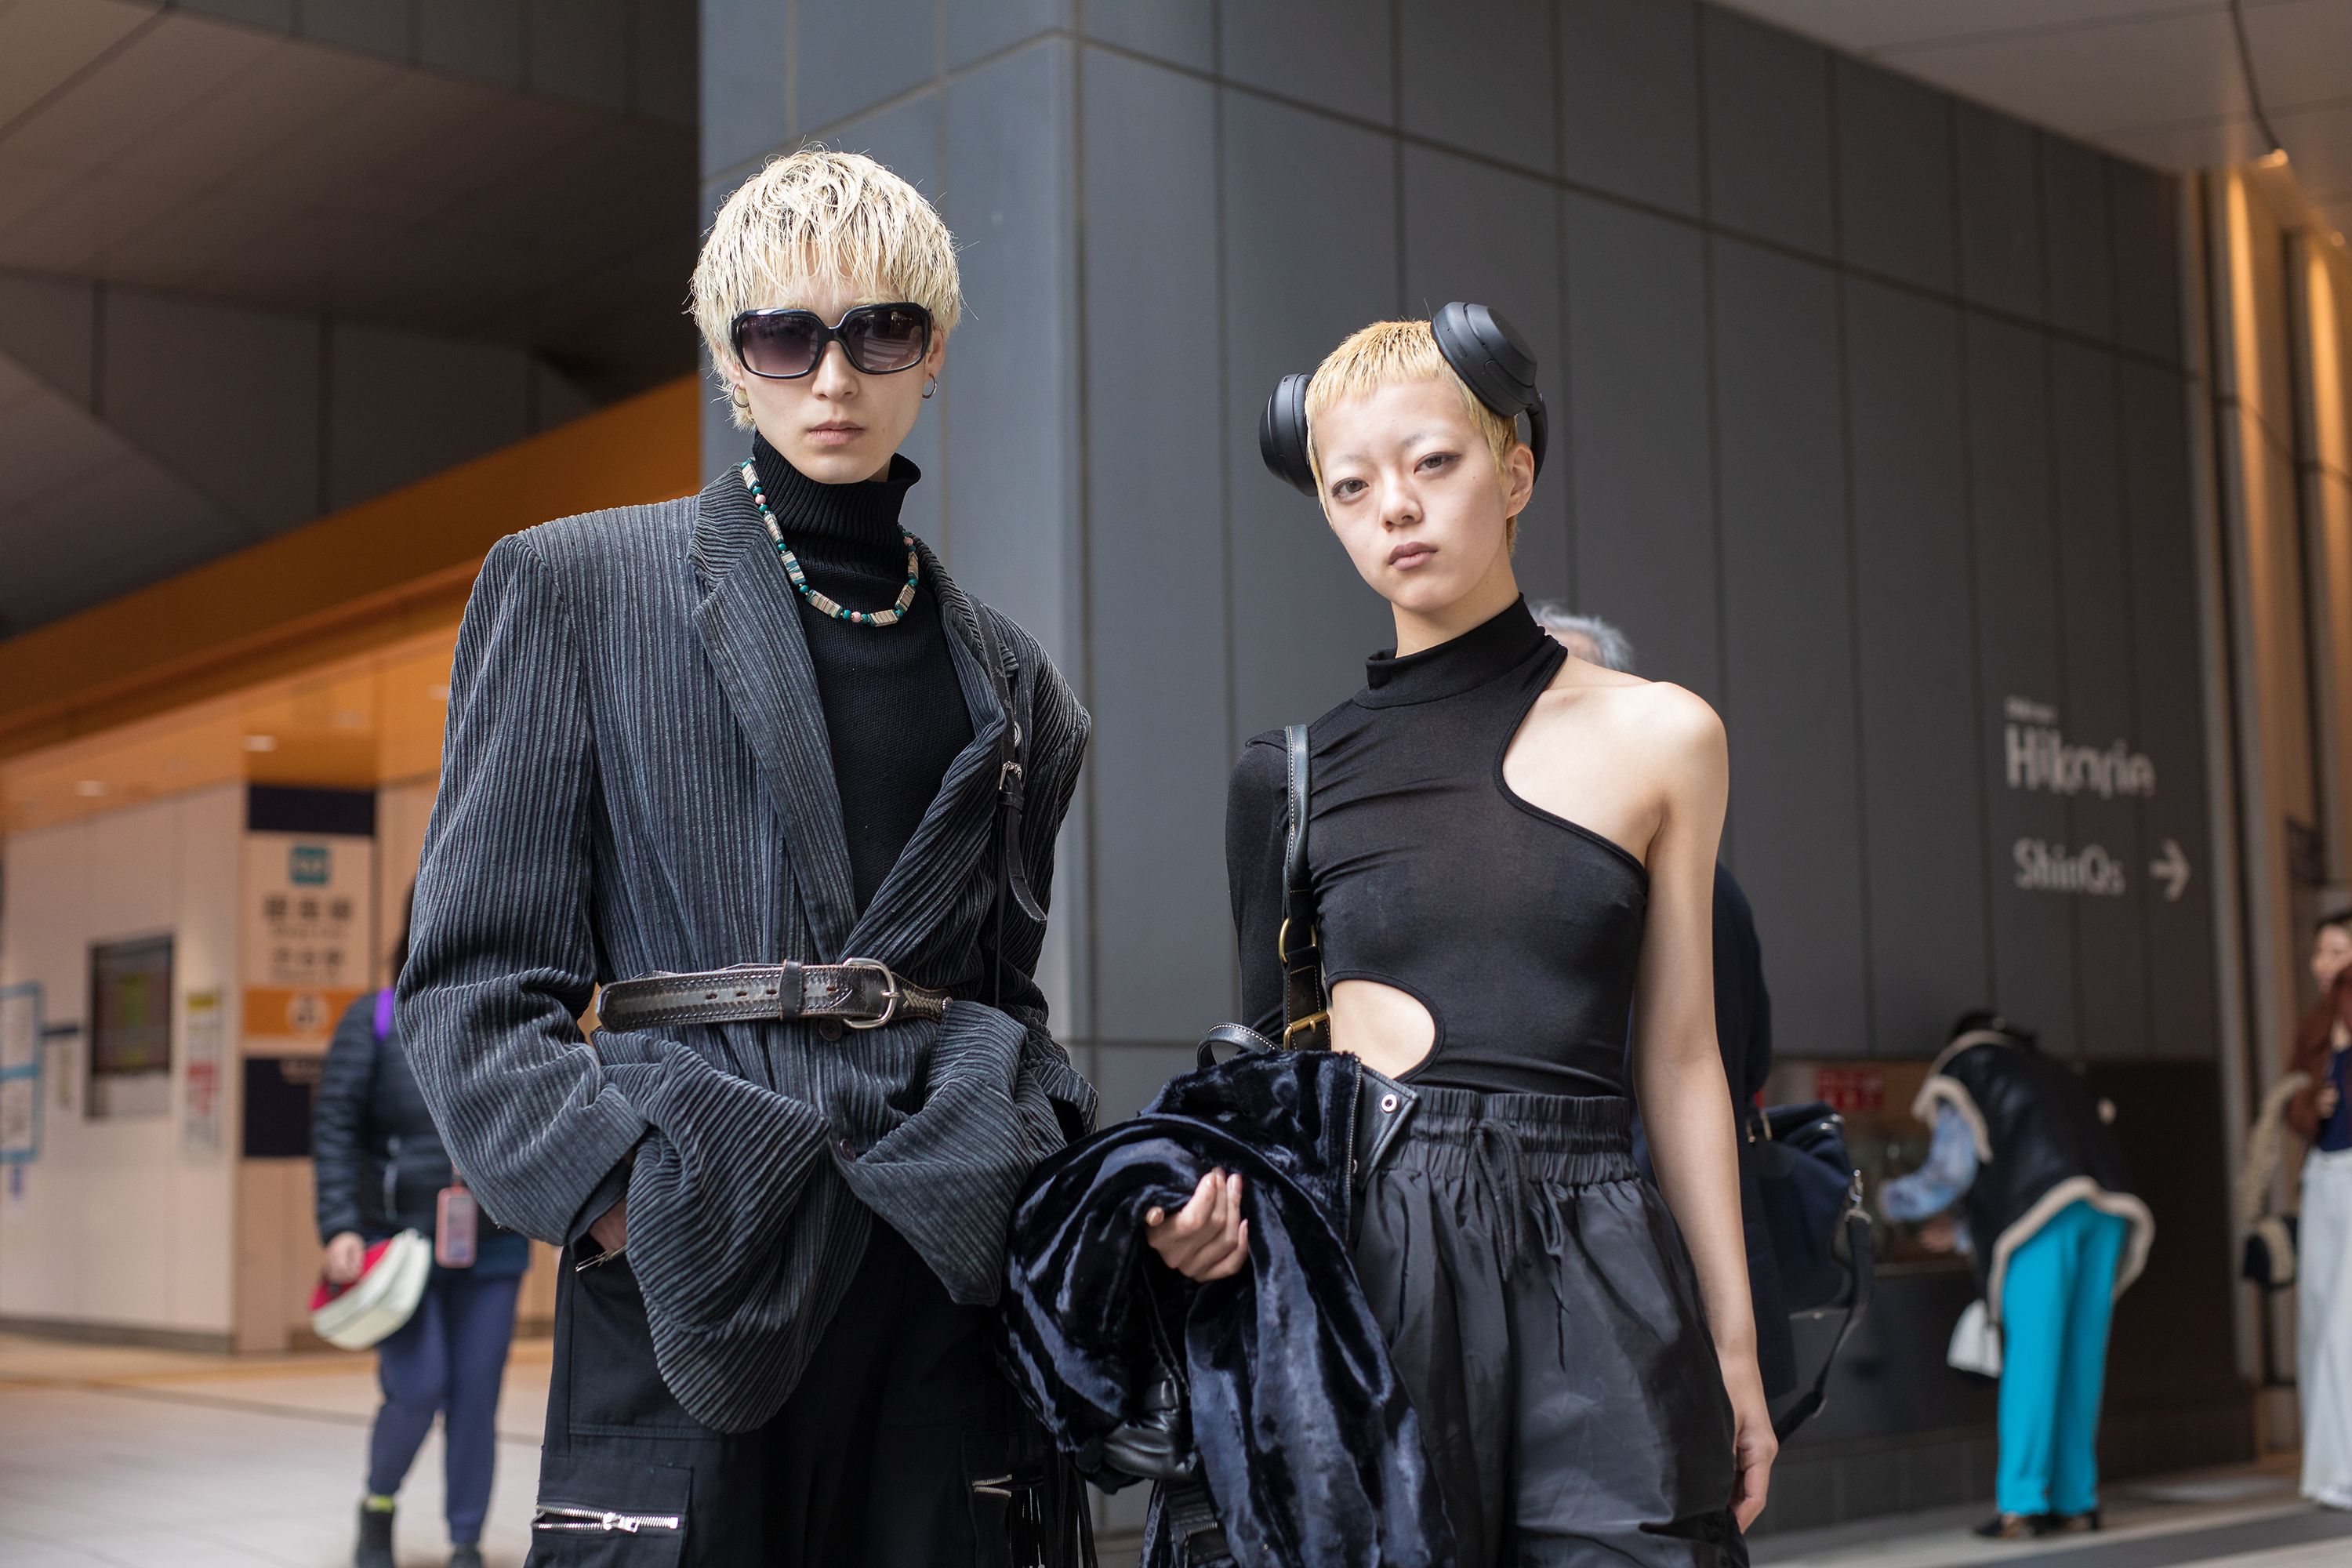 Japanese fashion is so free': The best street style at Tokyo Fashion Week